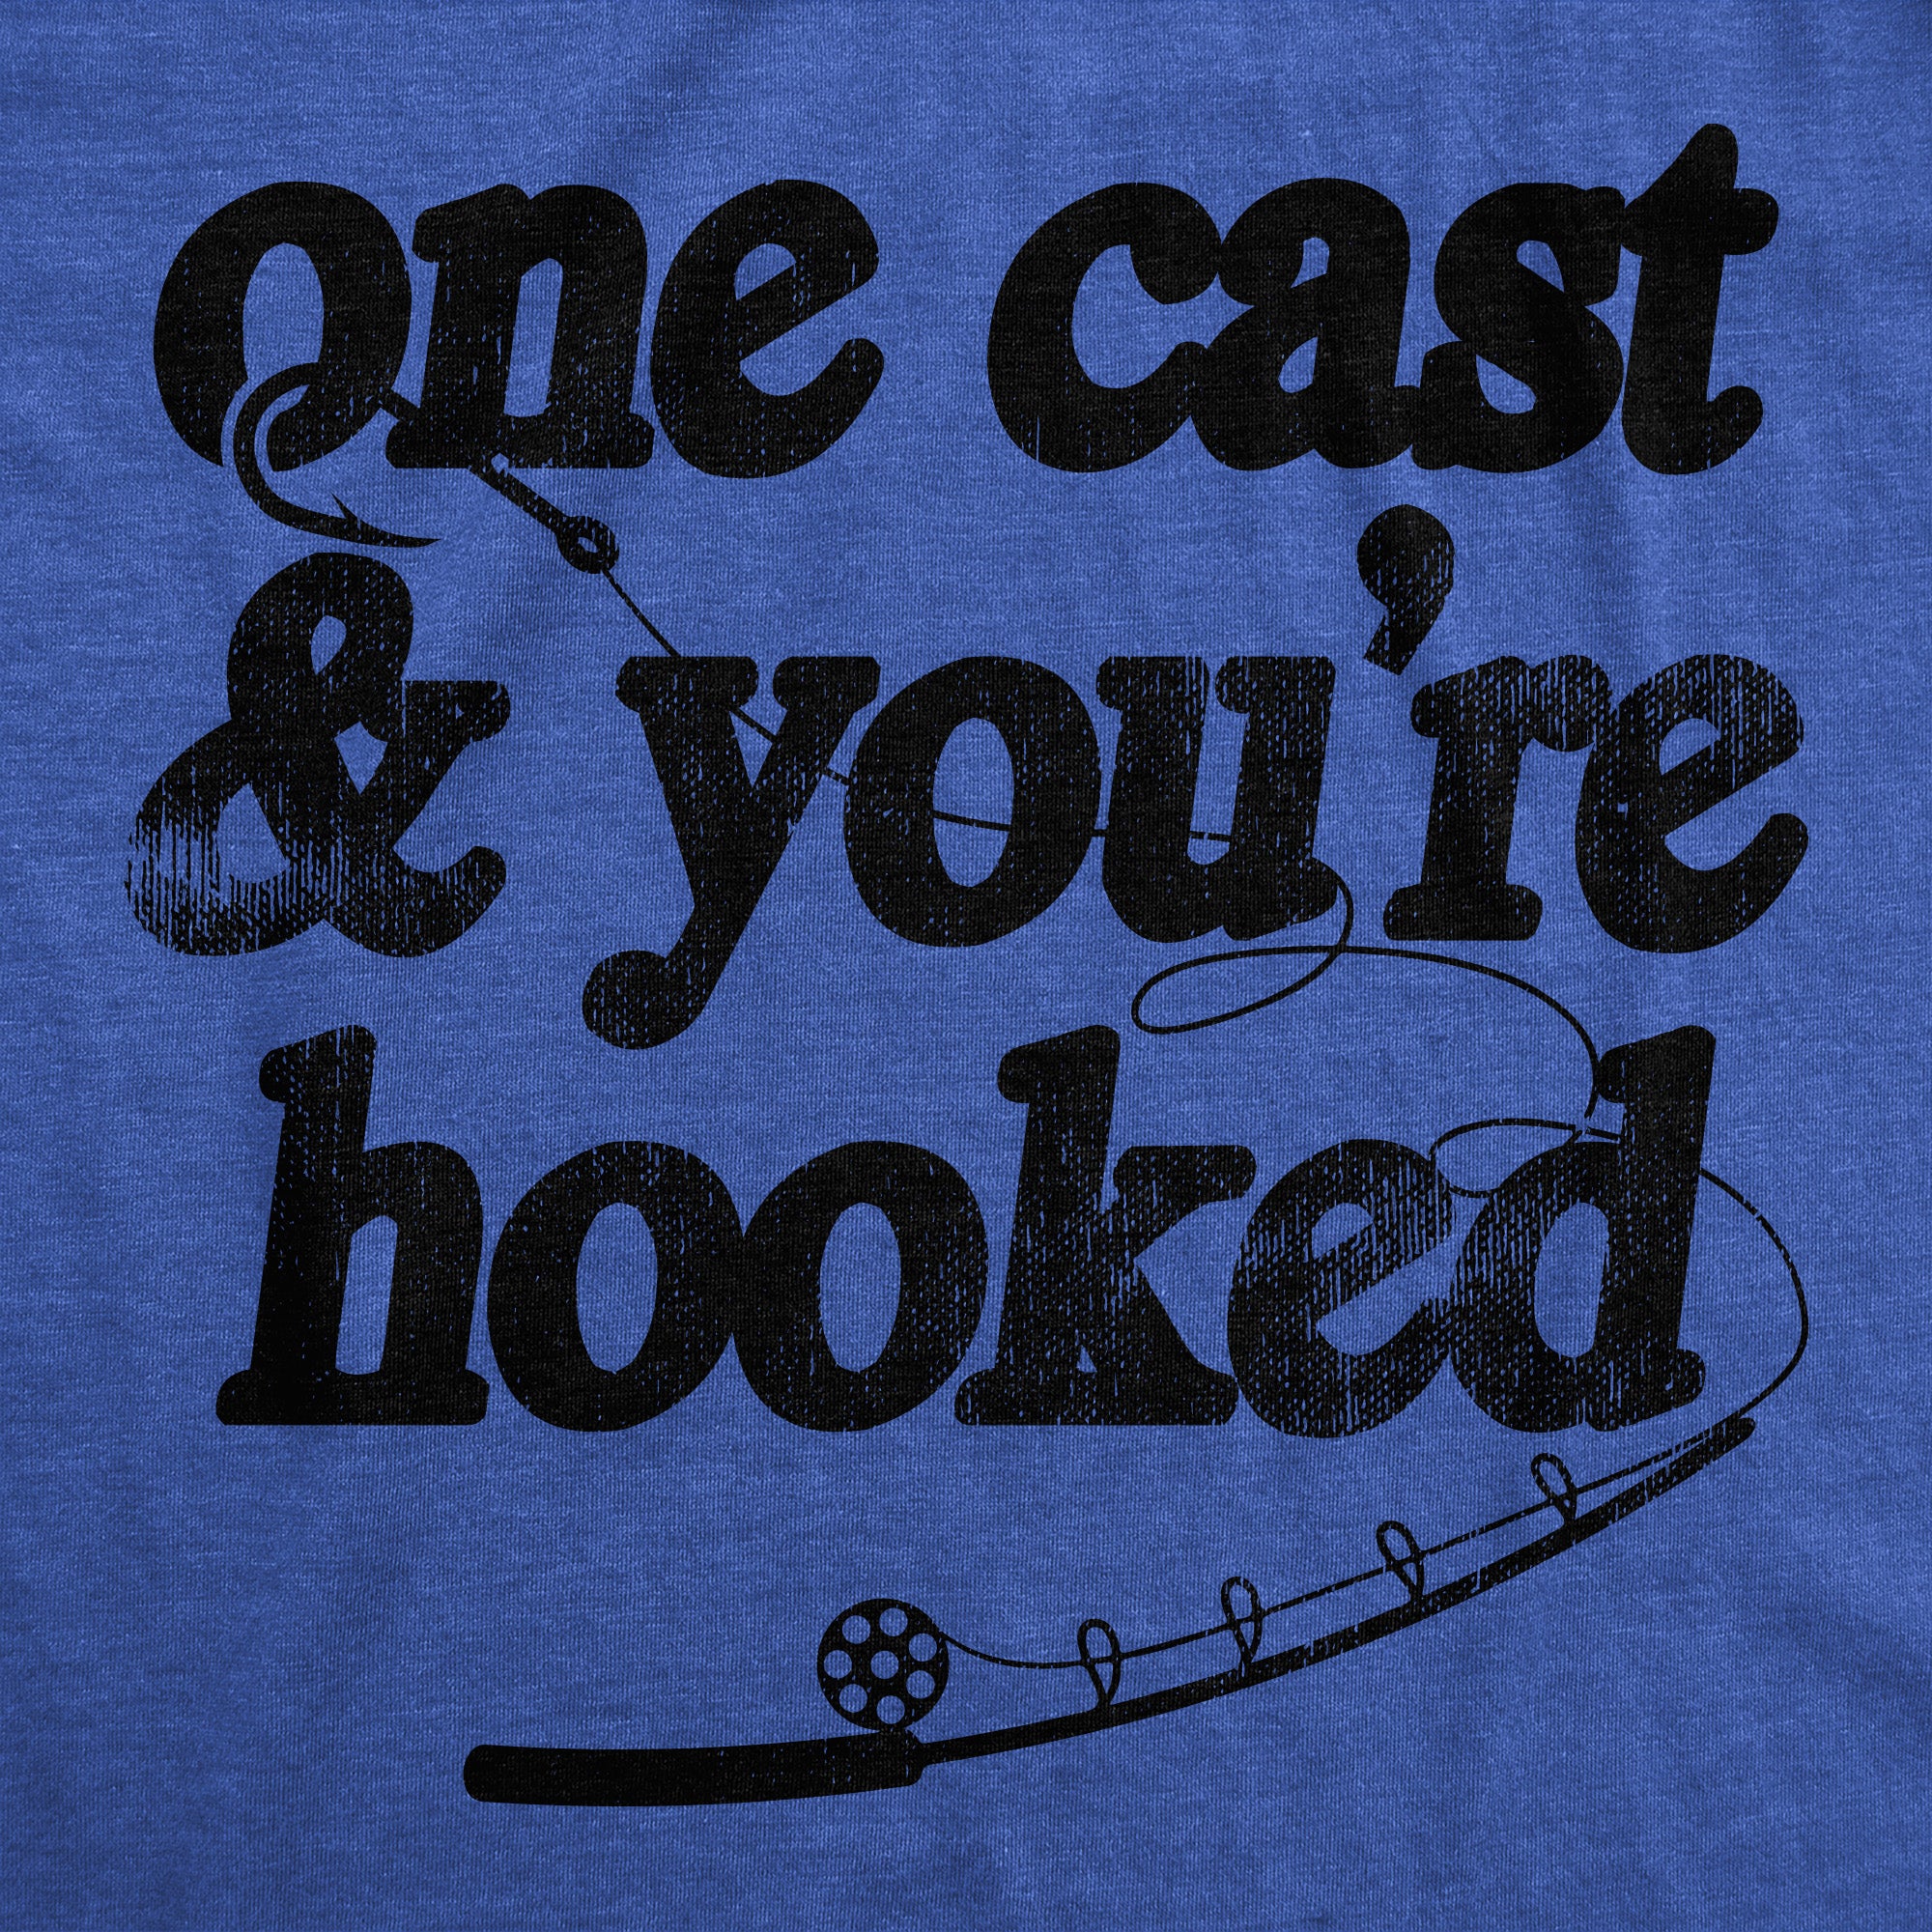 Funny Heather Royal - HOOKED One Cast And Youre Hooked Mens T Shirt Nerdy Fishing Tee